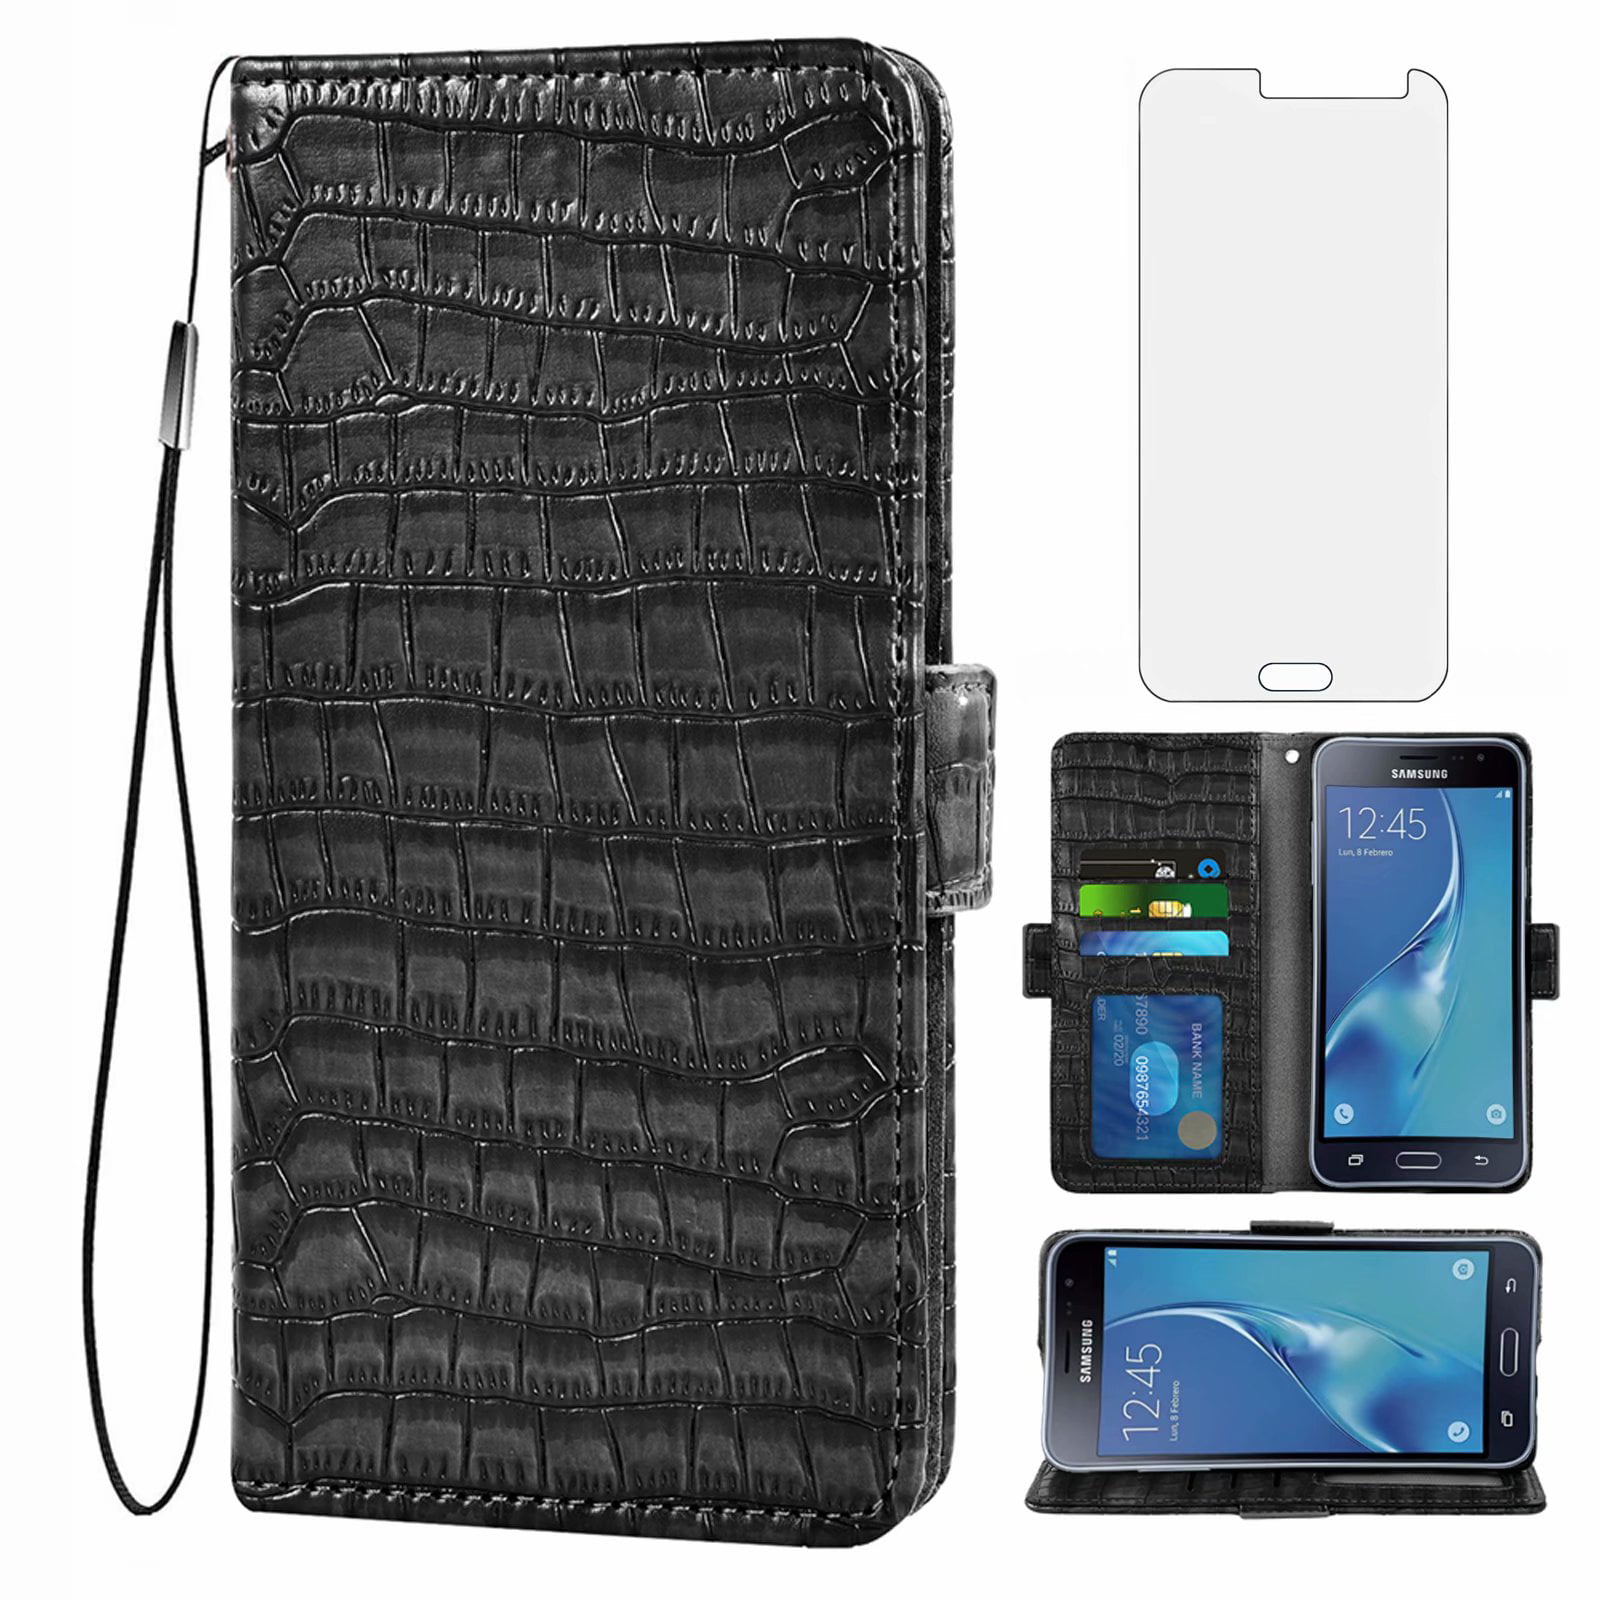 Case For Galaxy J3 16 Pu Leather Cover Phone Case For Samsung Galaxy J3 16 Wallet Scratch Resistant Magnet Phone Case With Card Slot Black Walmart Com Walmart Com